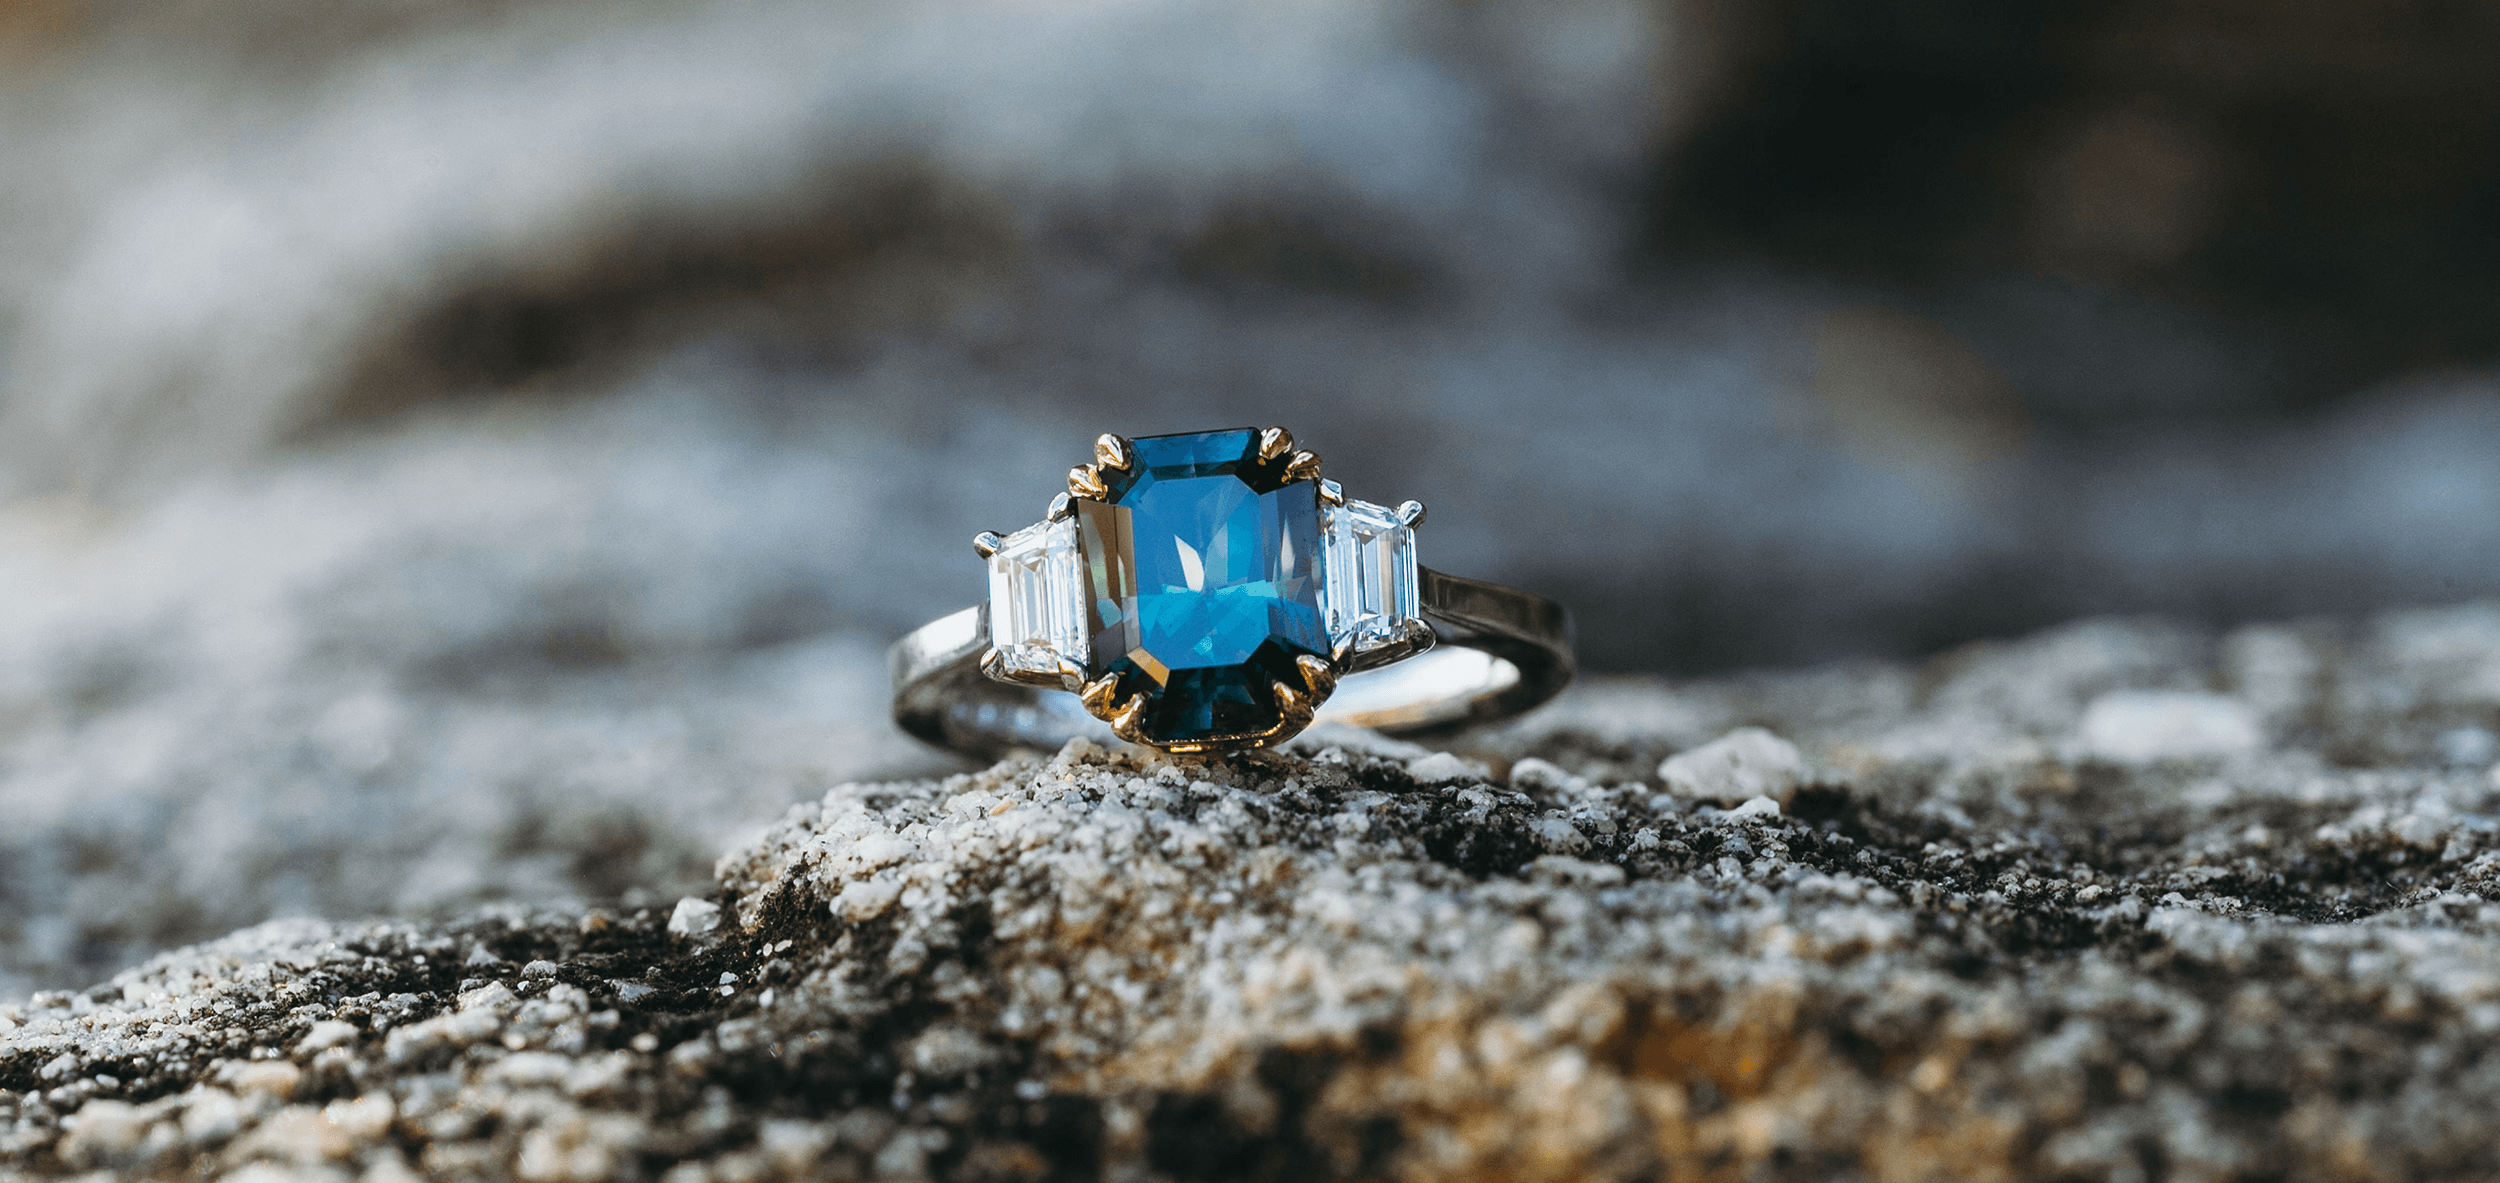 The jewellery she can expect when she's expecting – Imperial Jewellery